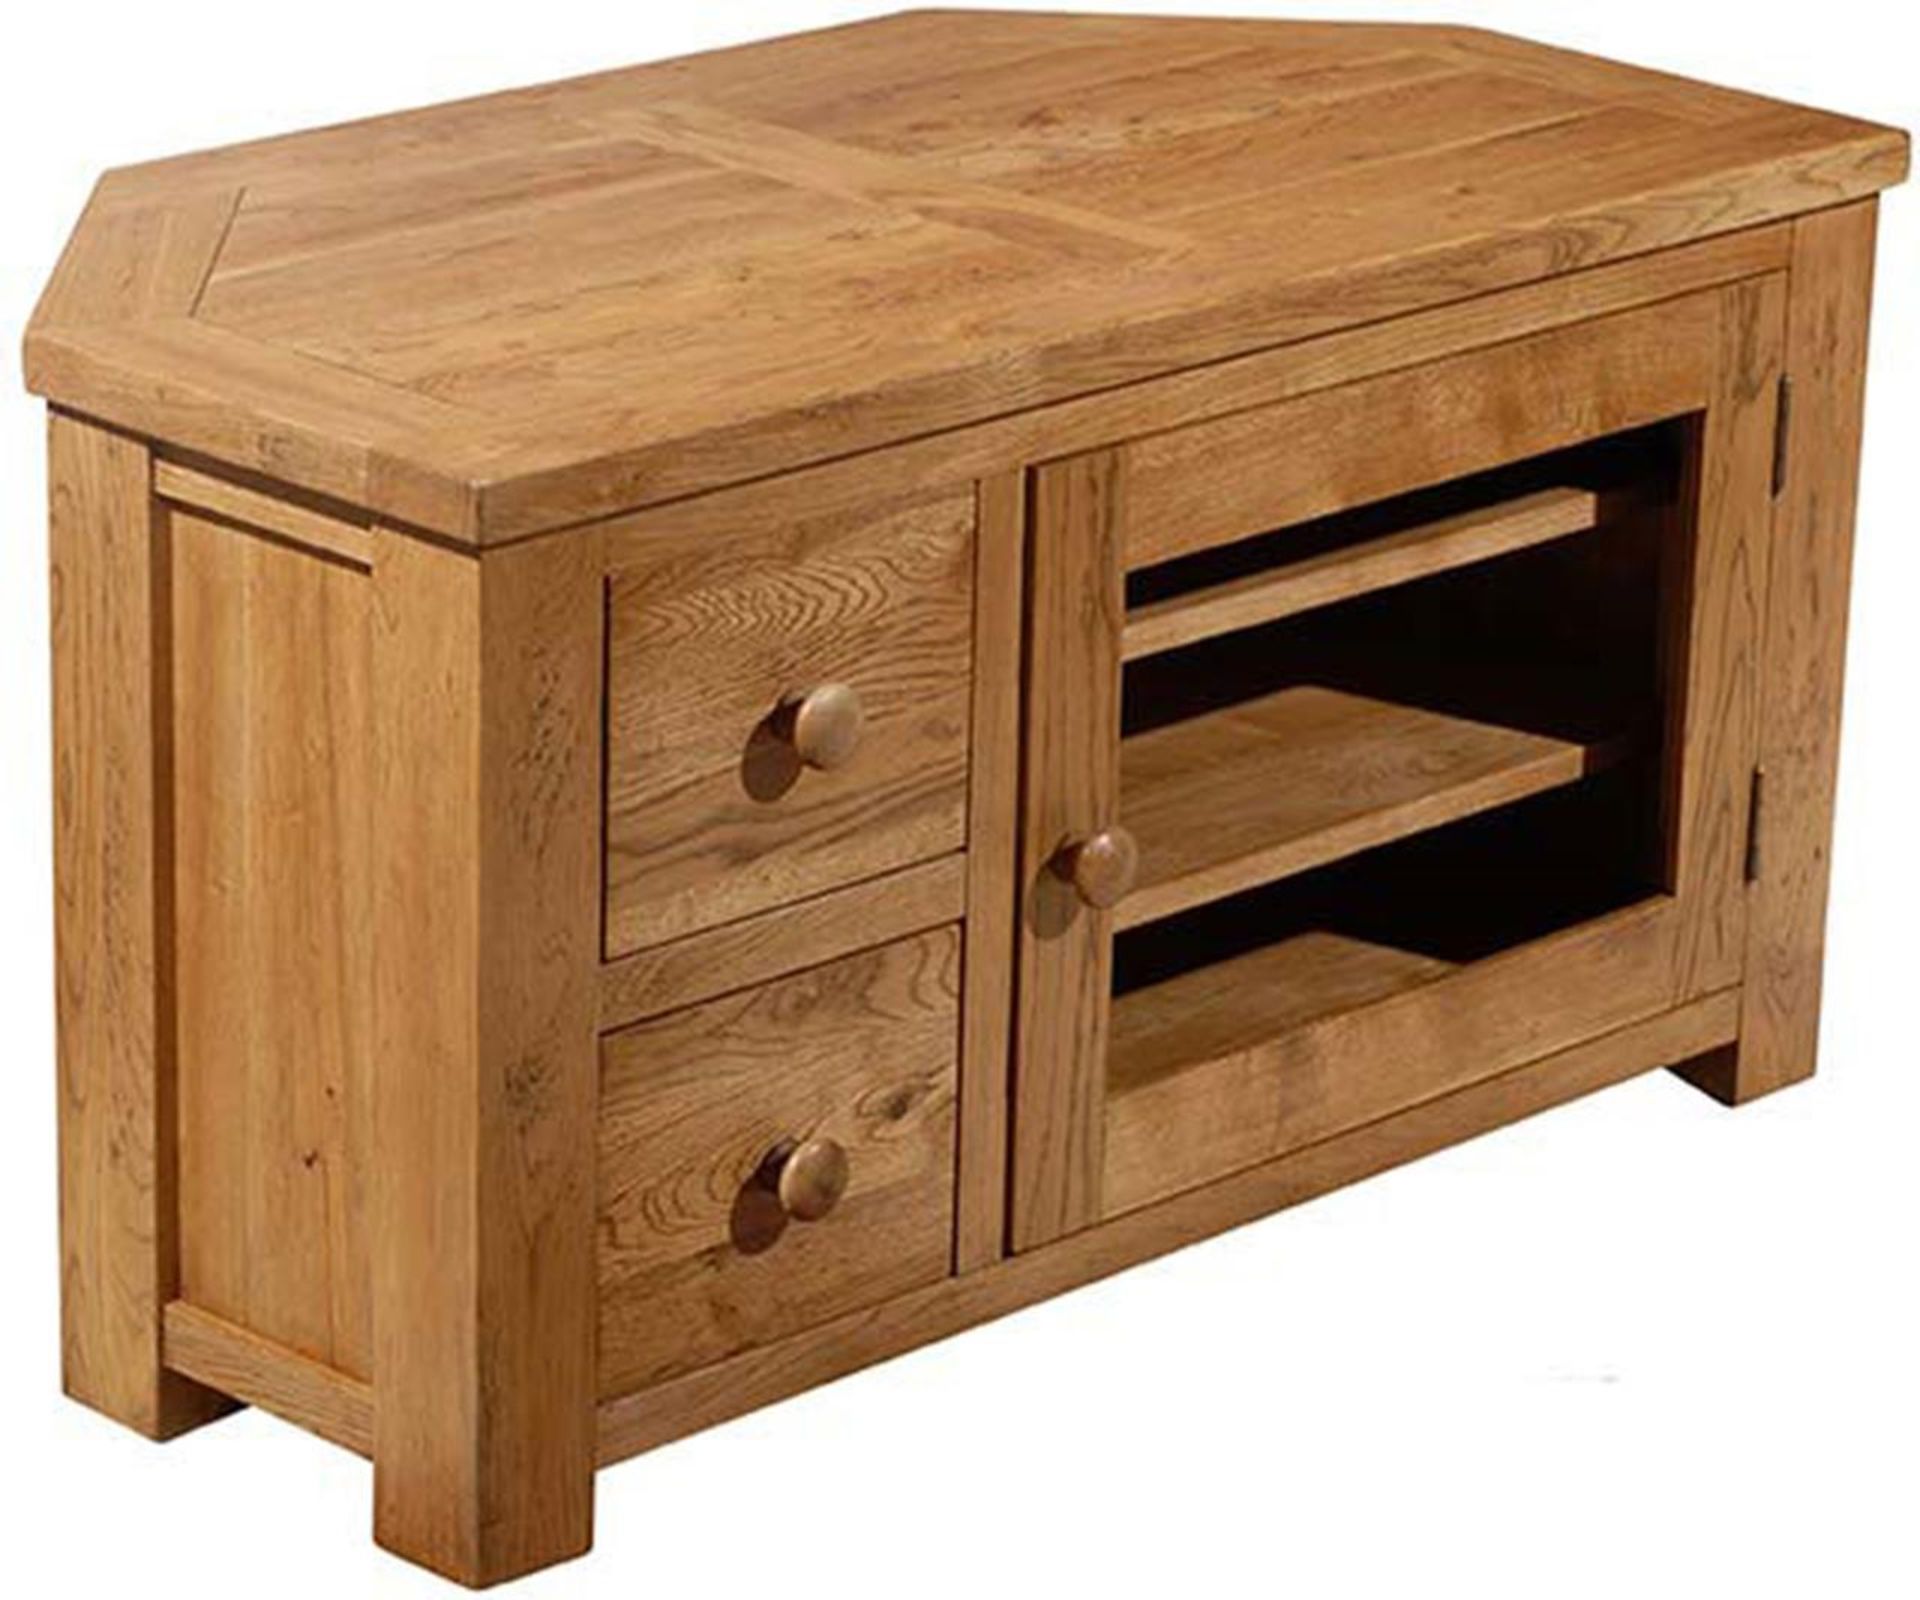 Wentworth Media Unit Crafted Using Hand Selected Solid Oak Wood And Hand Distressed During Our